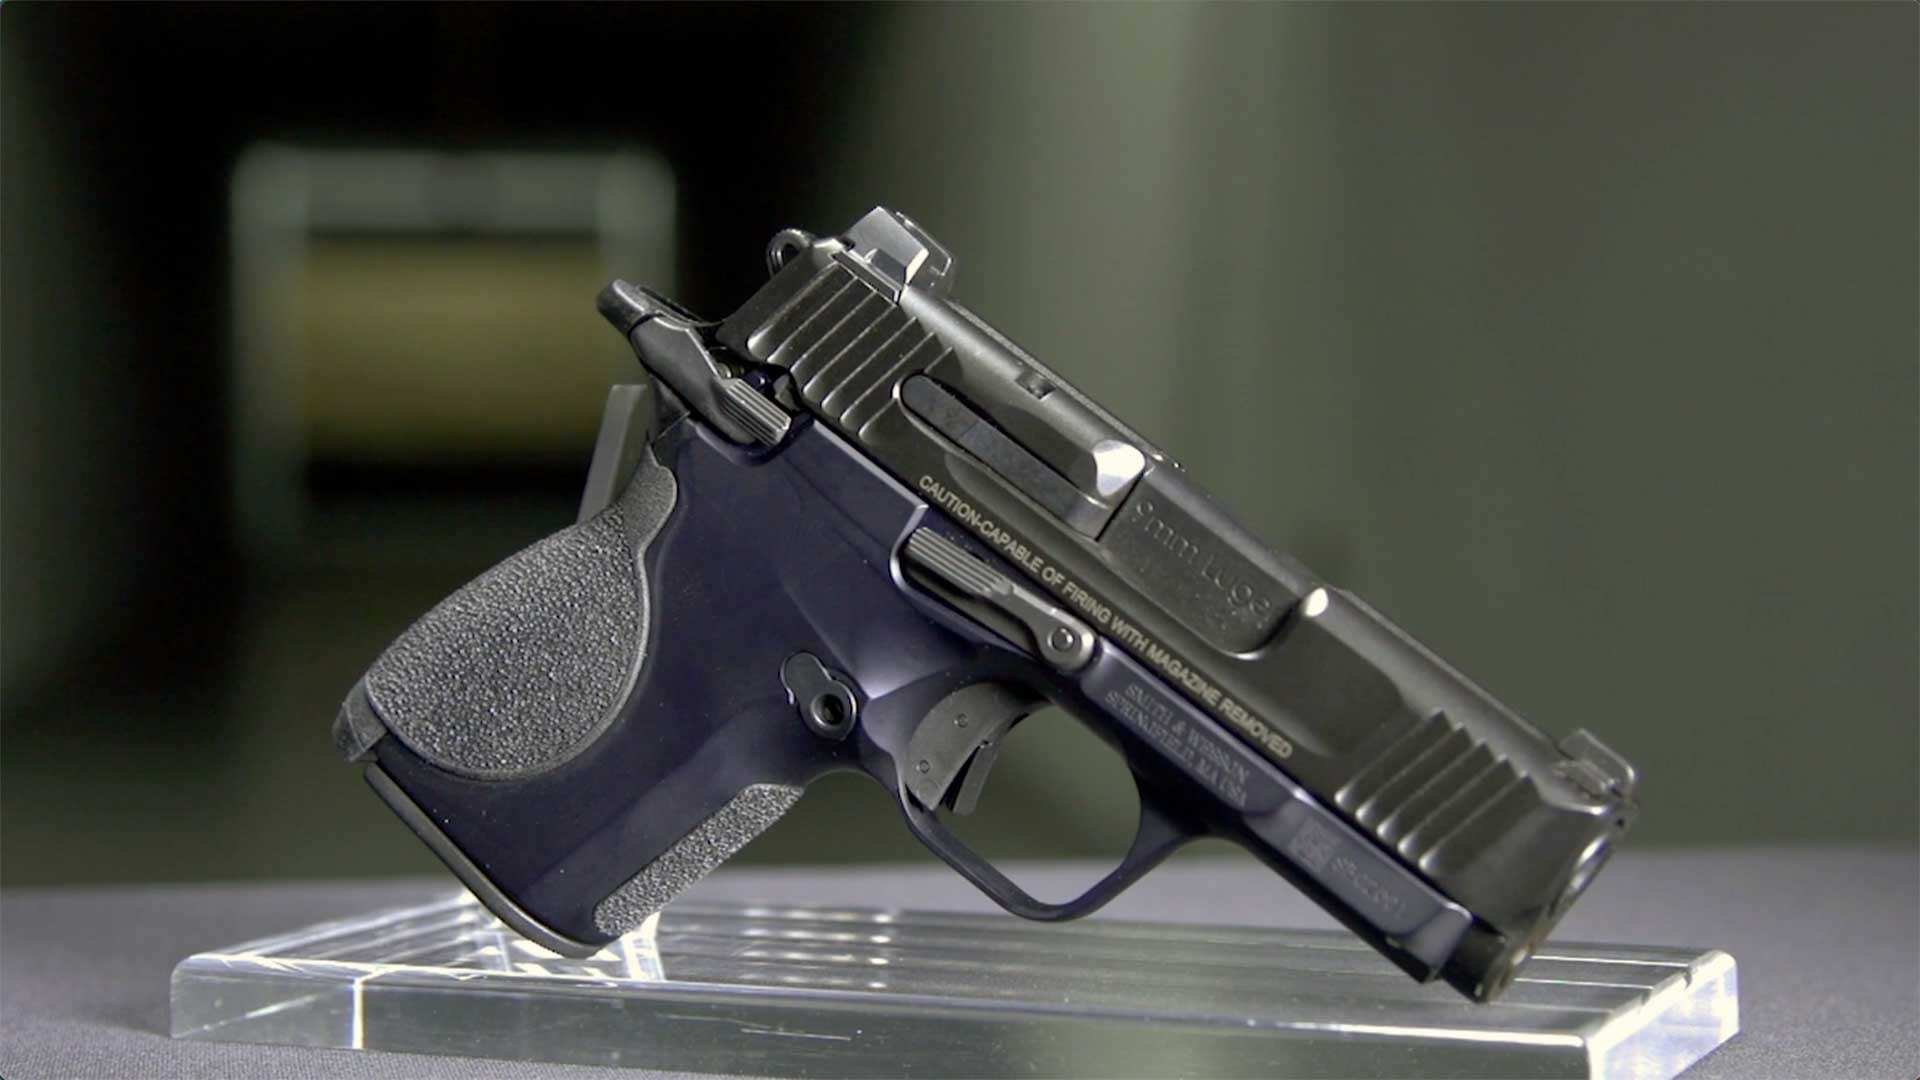 Right side of the Smith & Wesson CSX shown on a table with a dark range in the background.